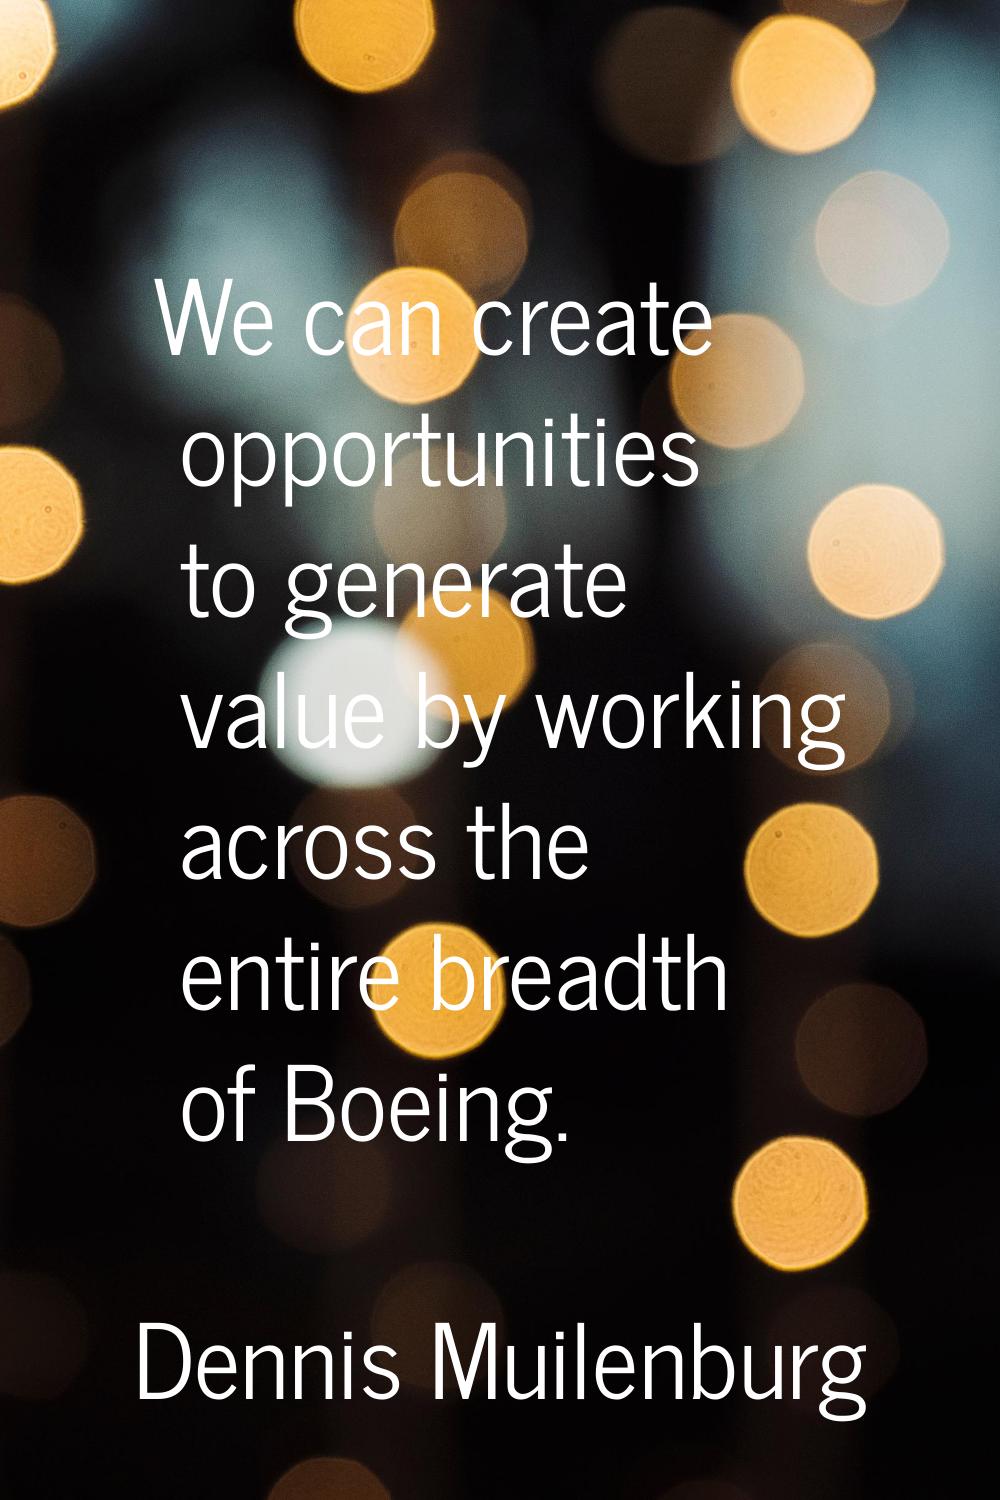 We can create opportunities to generate value by working across the entire breadth of Boeing.